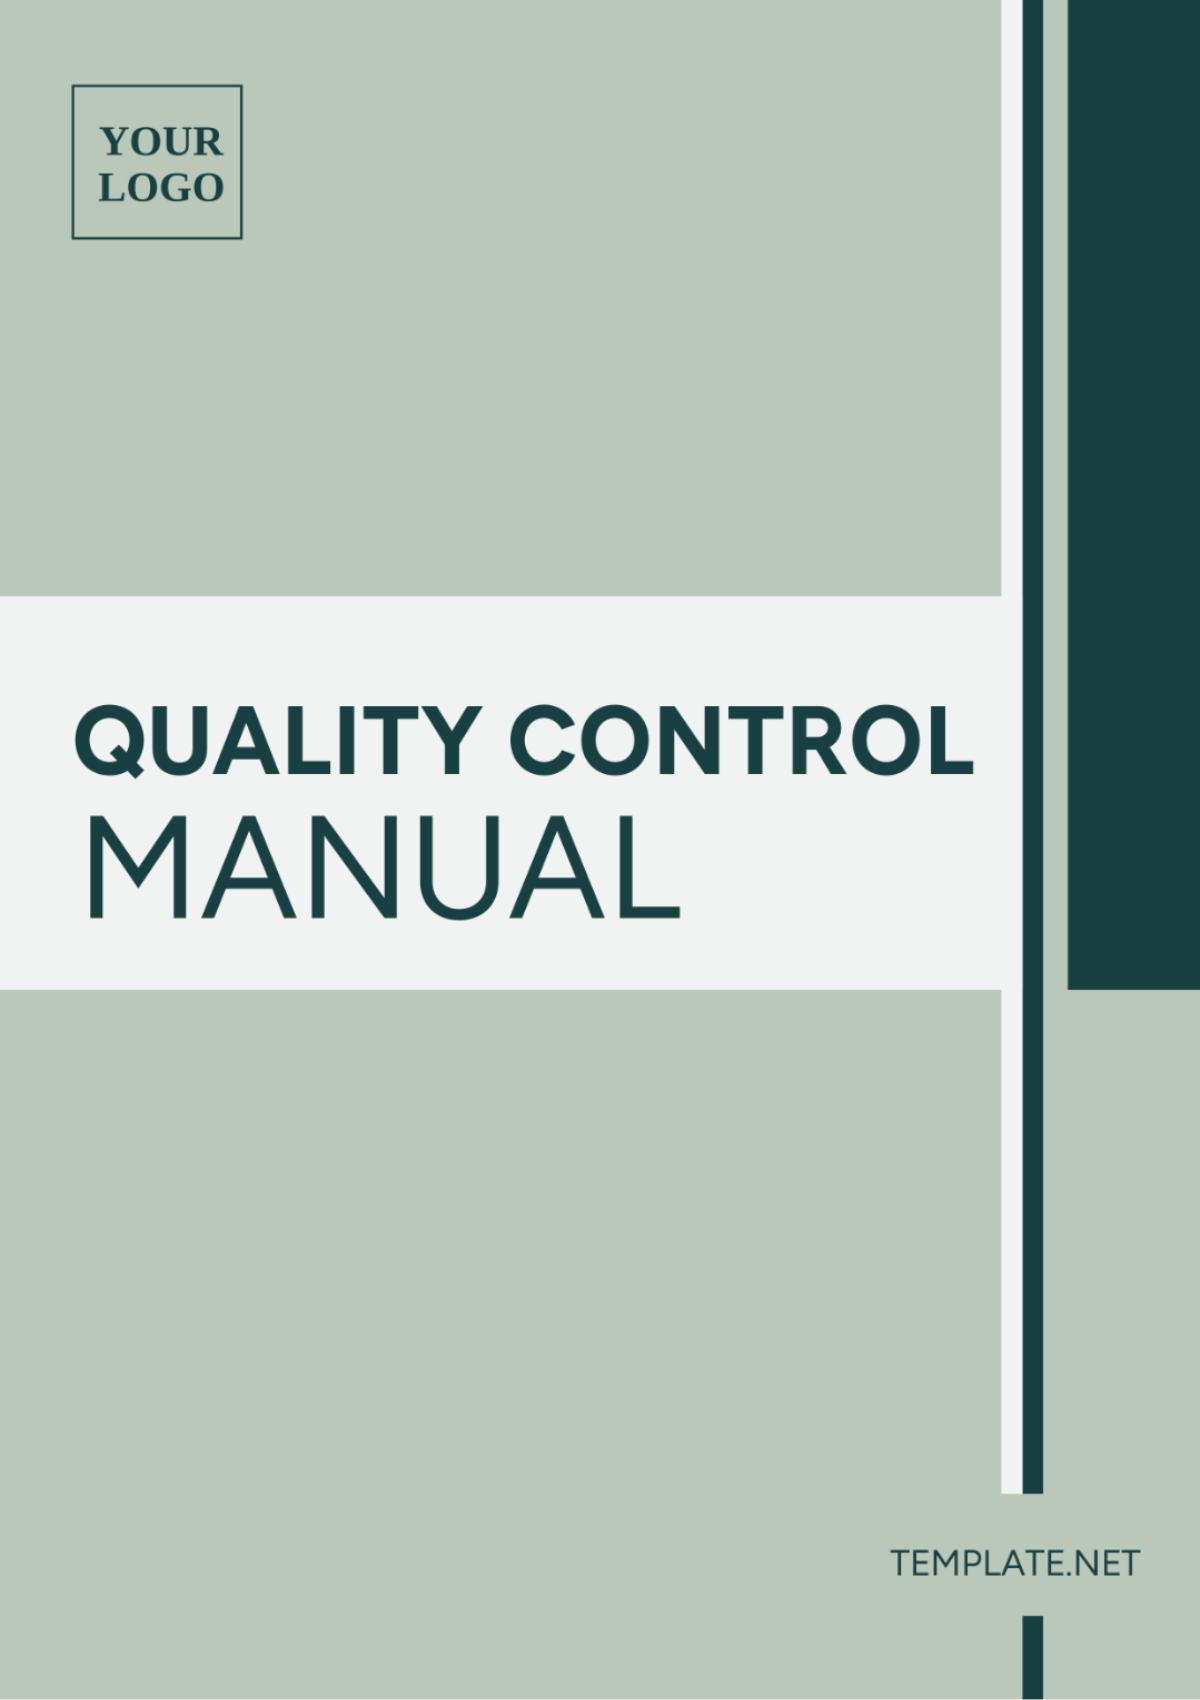 Quality Control Manual Template